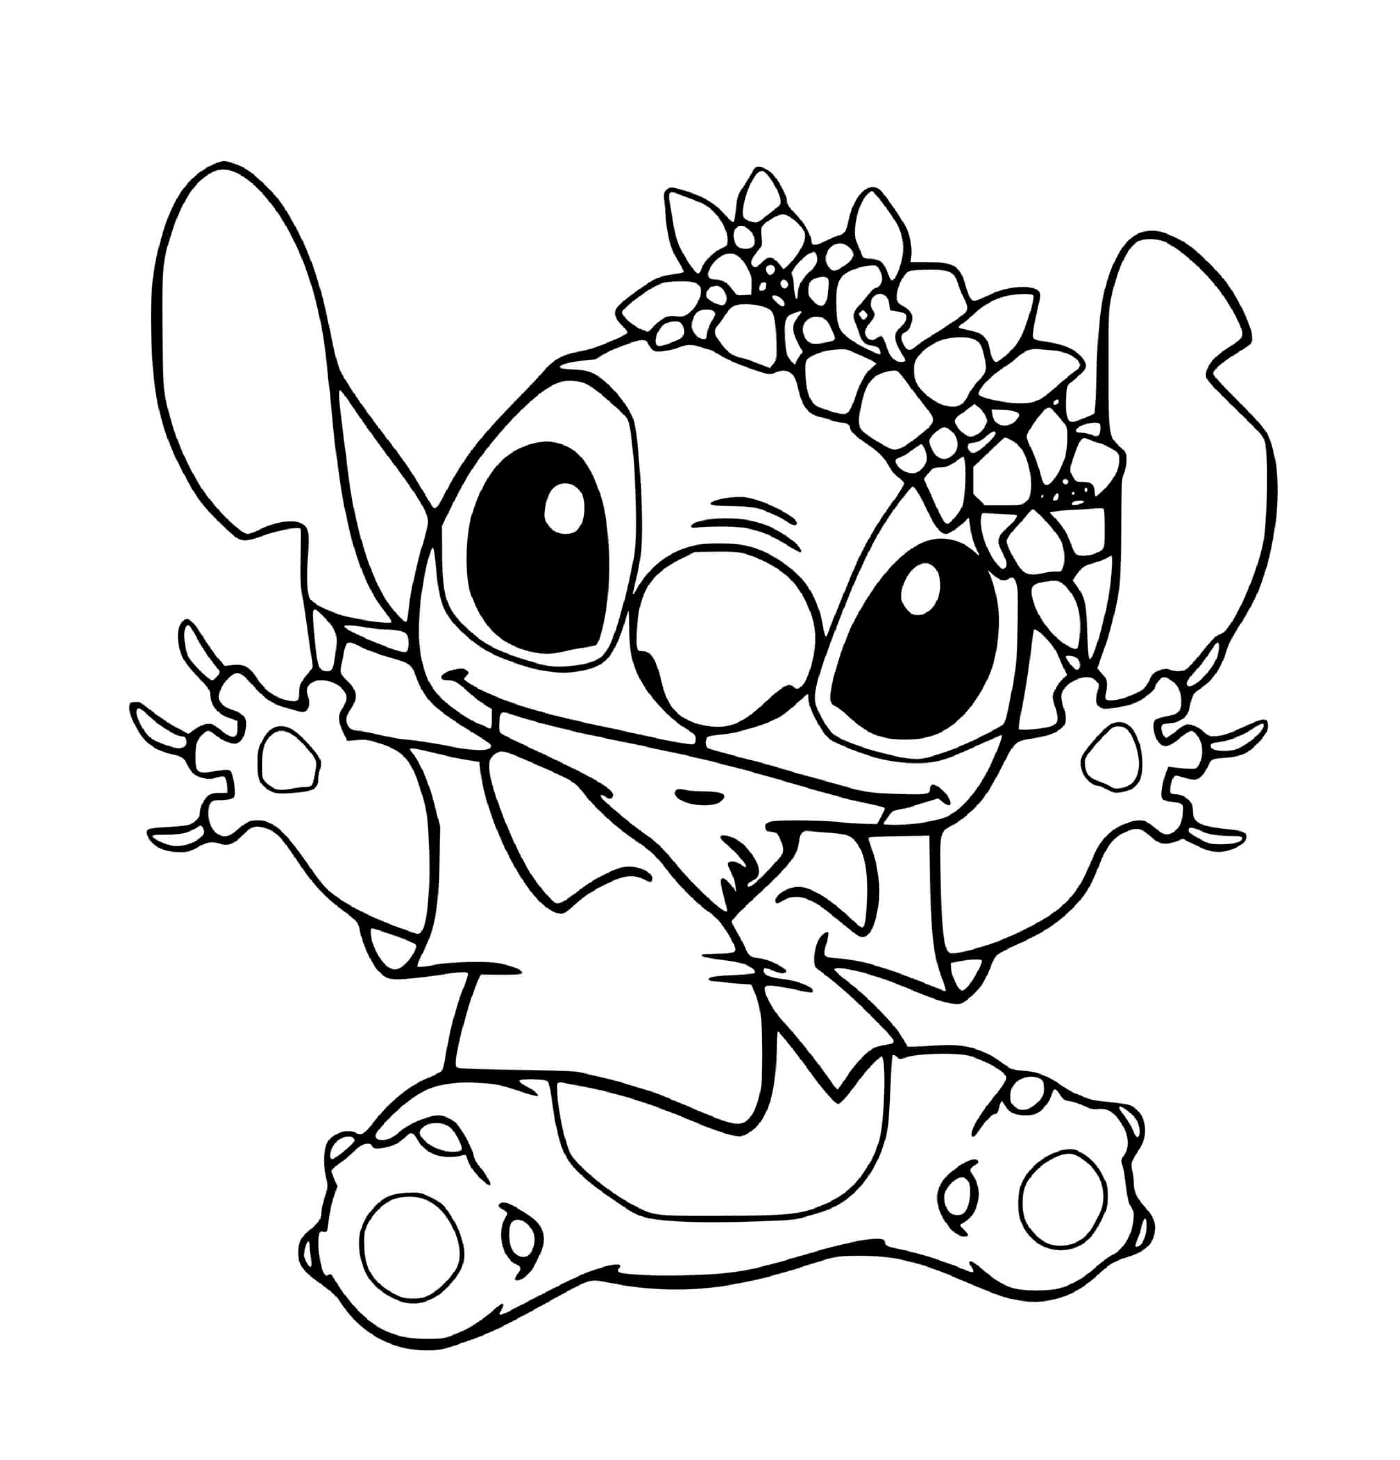  Stitch with a crown of flowers 